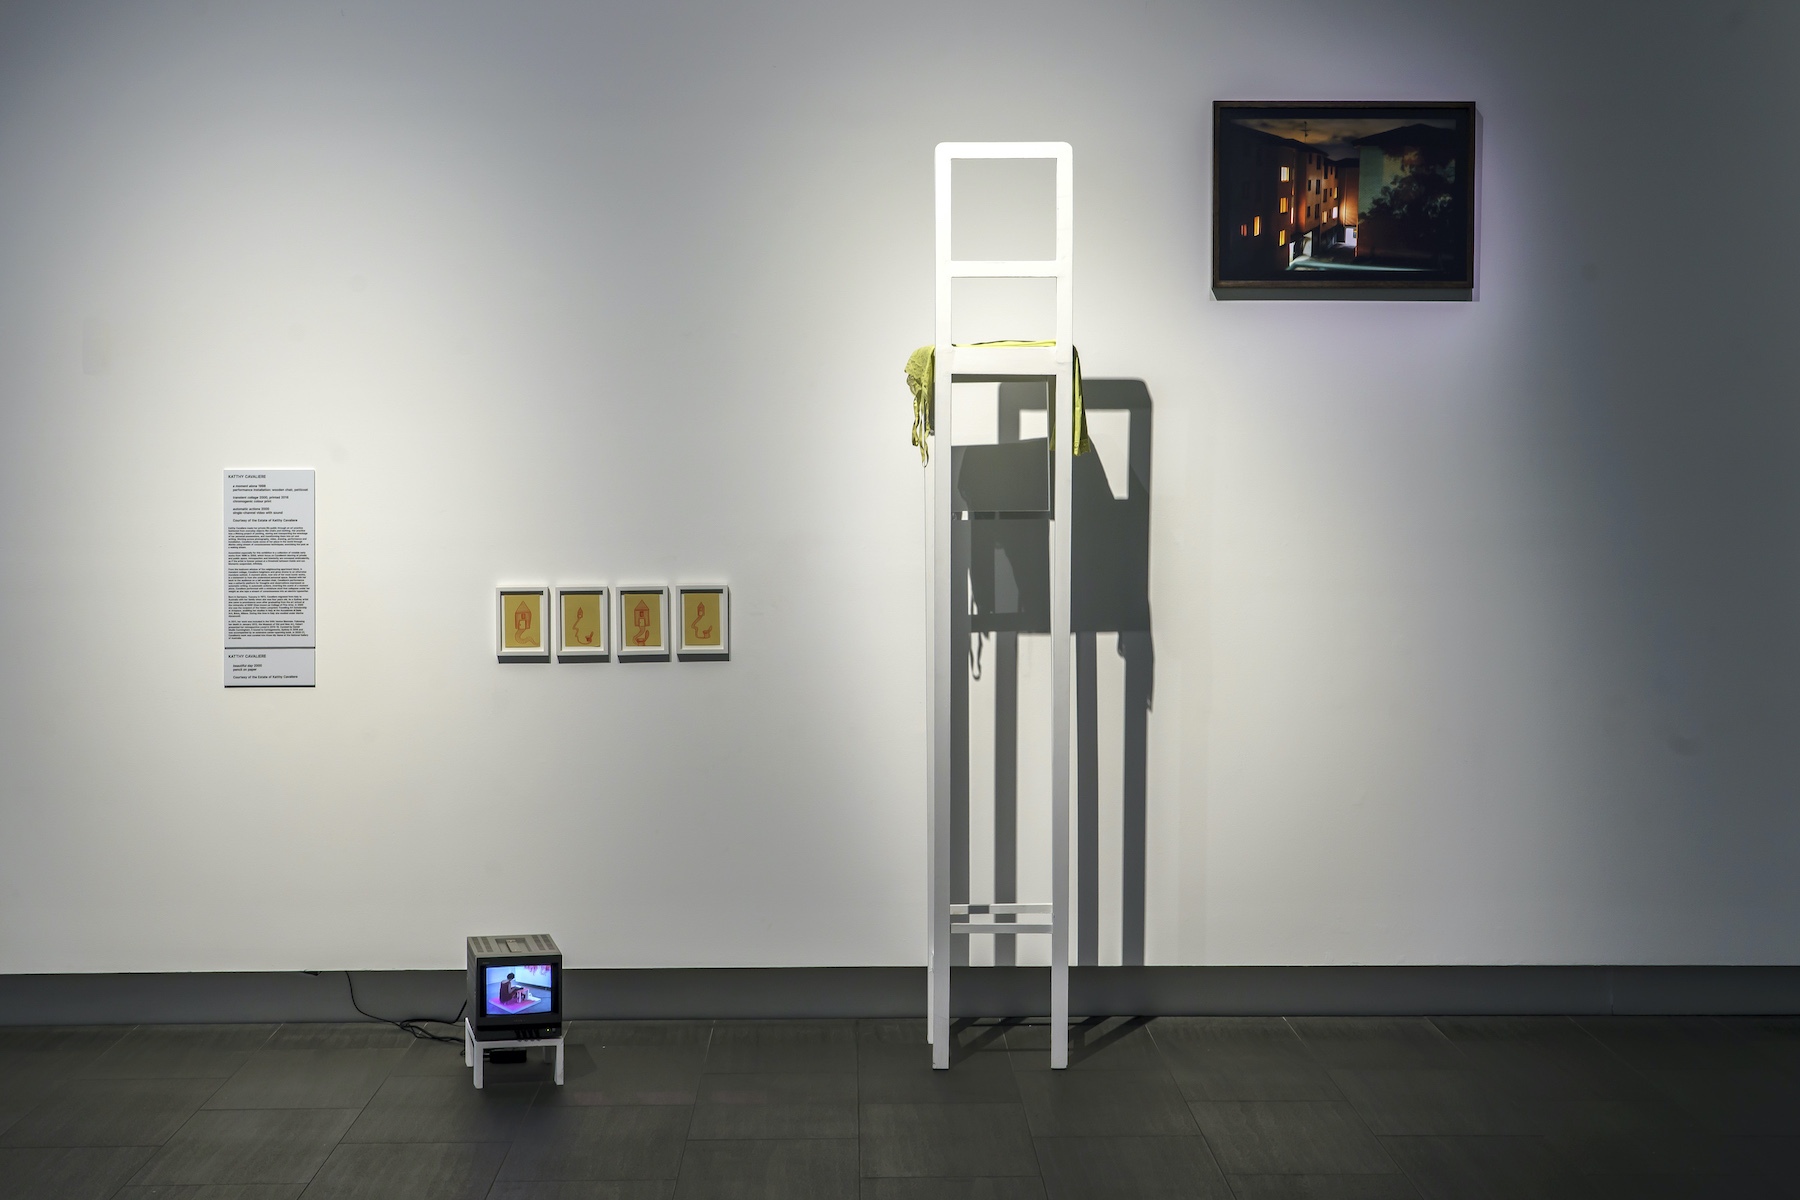 A collection of works including a very small screen on a small plinth, orange drawings of a house, an extremely high white chair, and a photograph of a building at night are arranged along a white gallery wall